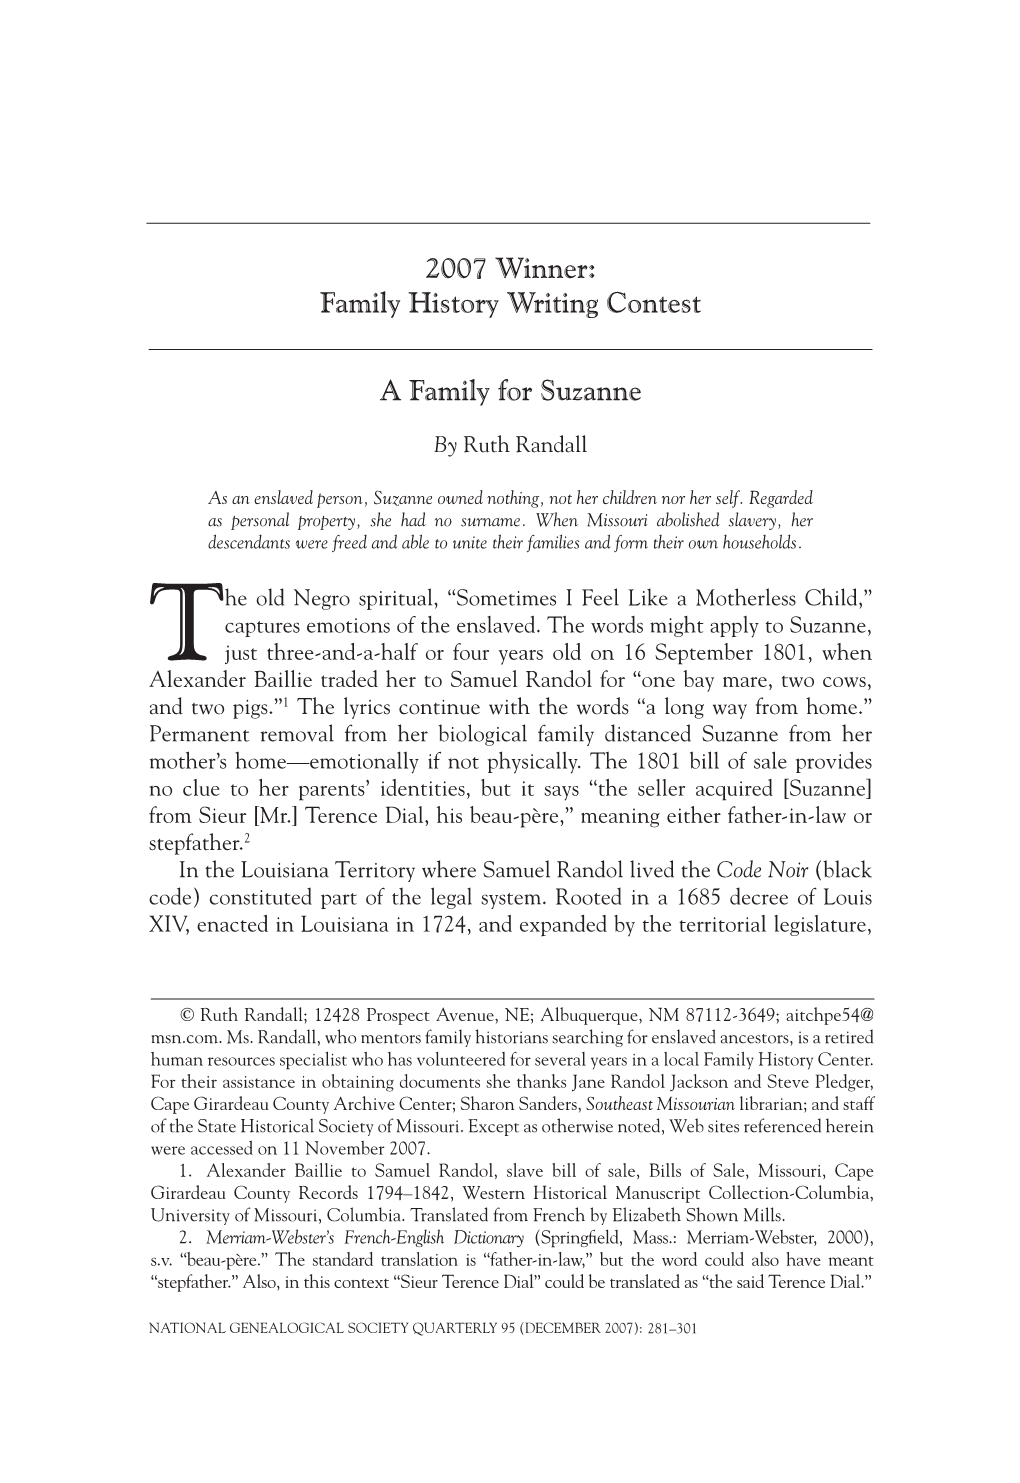 Family History Writing Contest a Family for Suzanne